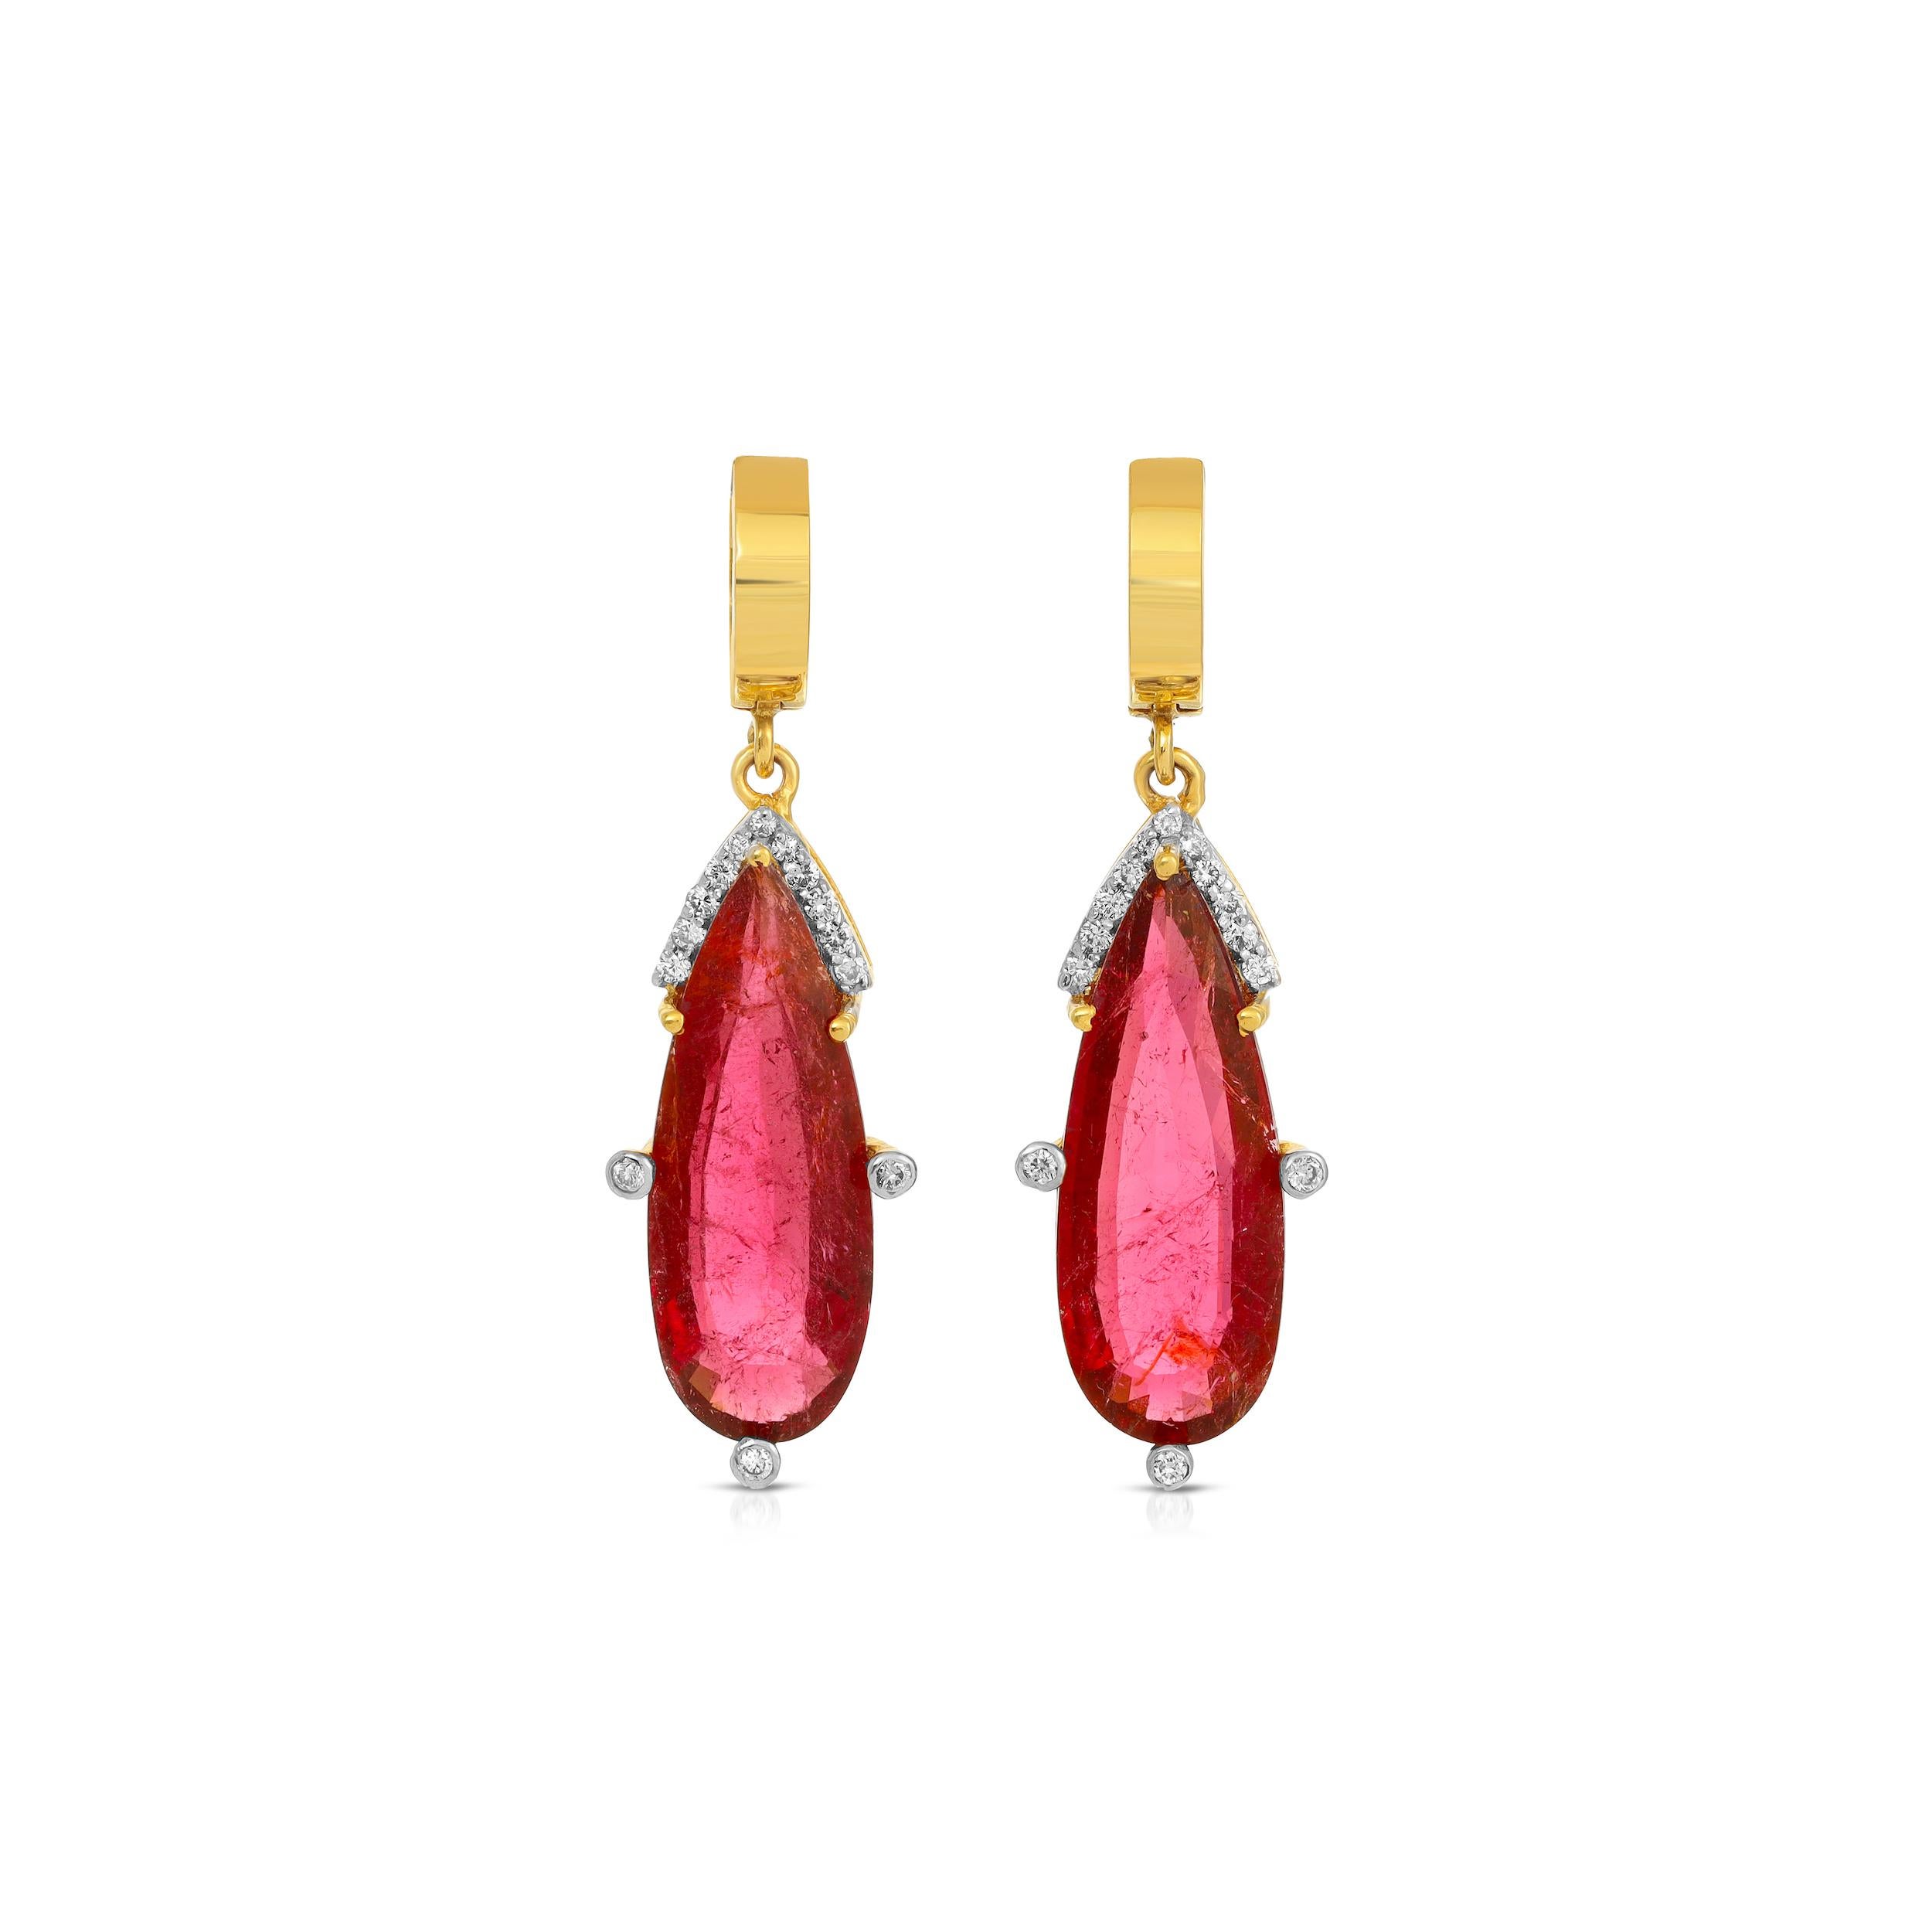 Spectacularly beautiful 18 Karat Gold drop earrings featuring contemporary design gold hoops suspending 12.80 Carats of pinkish-purple pear shaped Tourmalines set with Brilliant Cut White Diamonds and stylish diamond set 18 Karat White Gold claws.